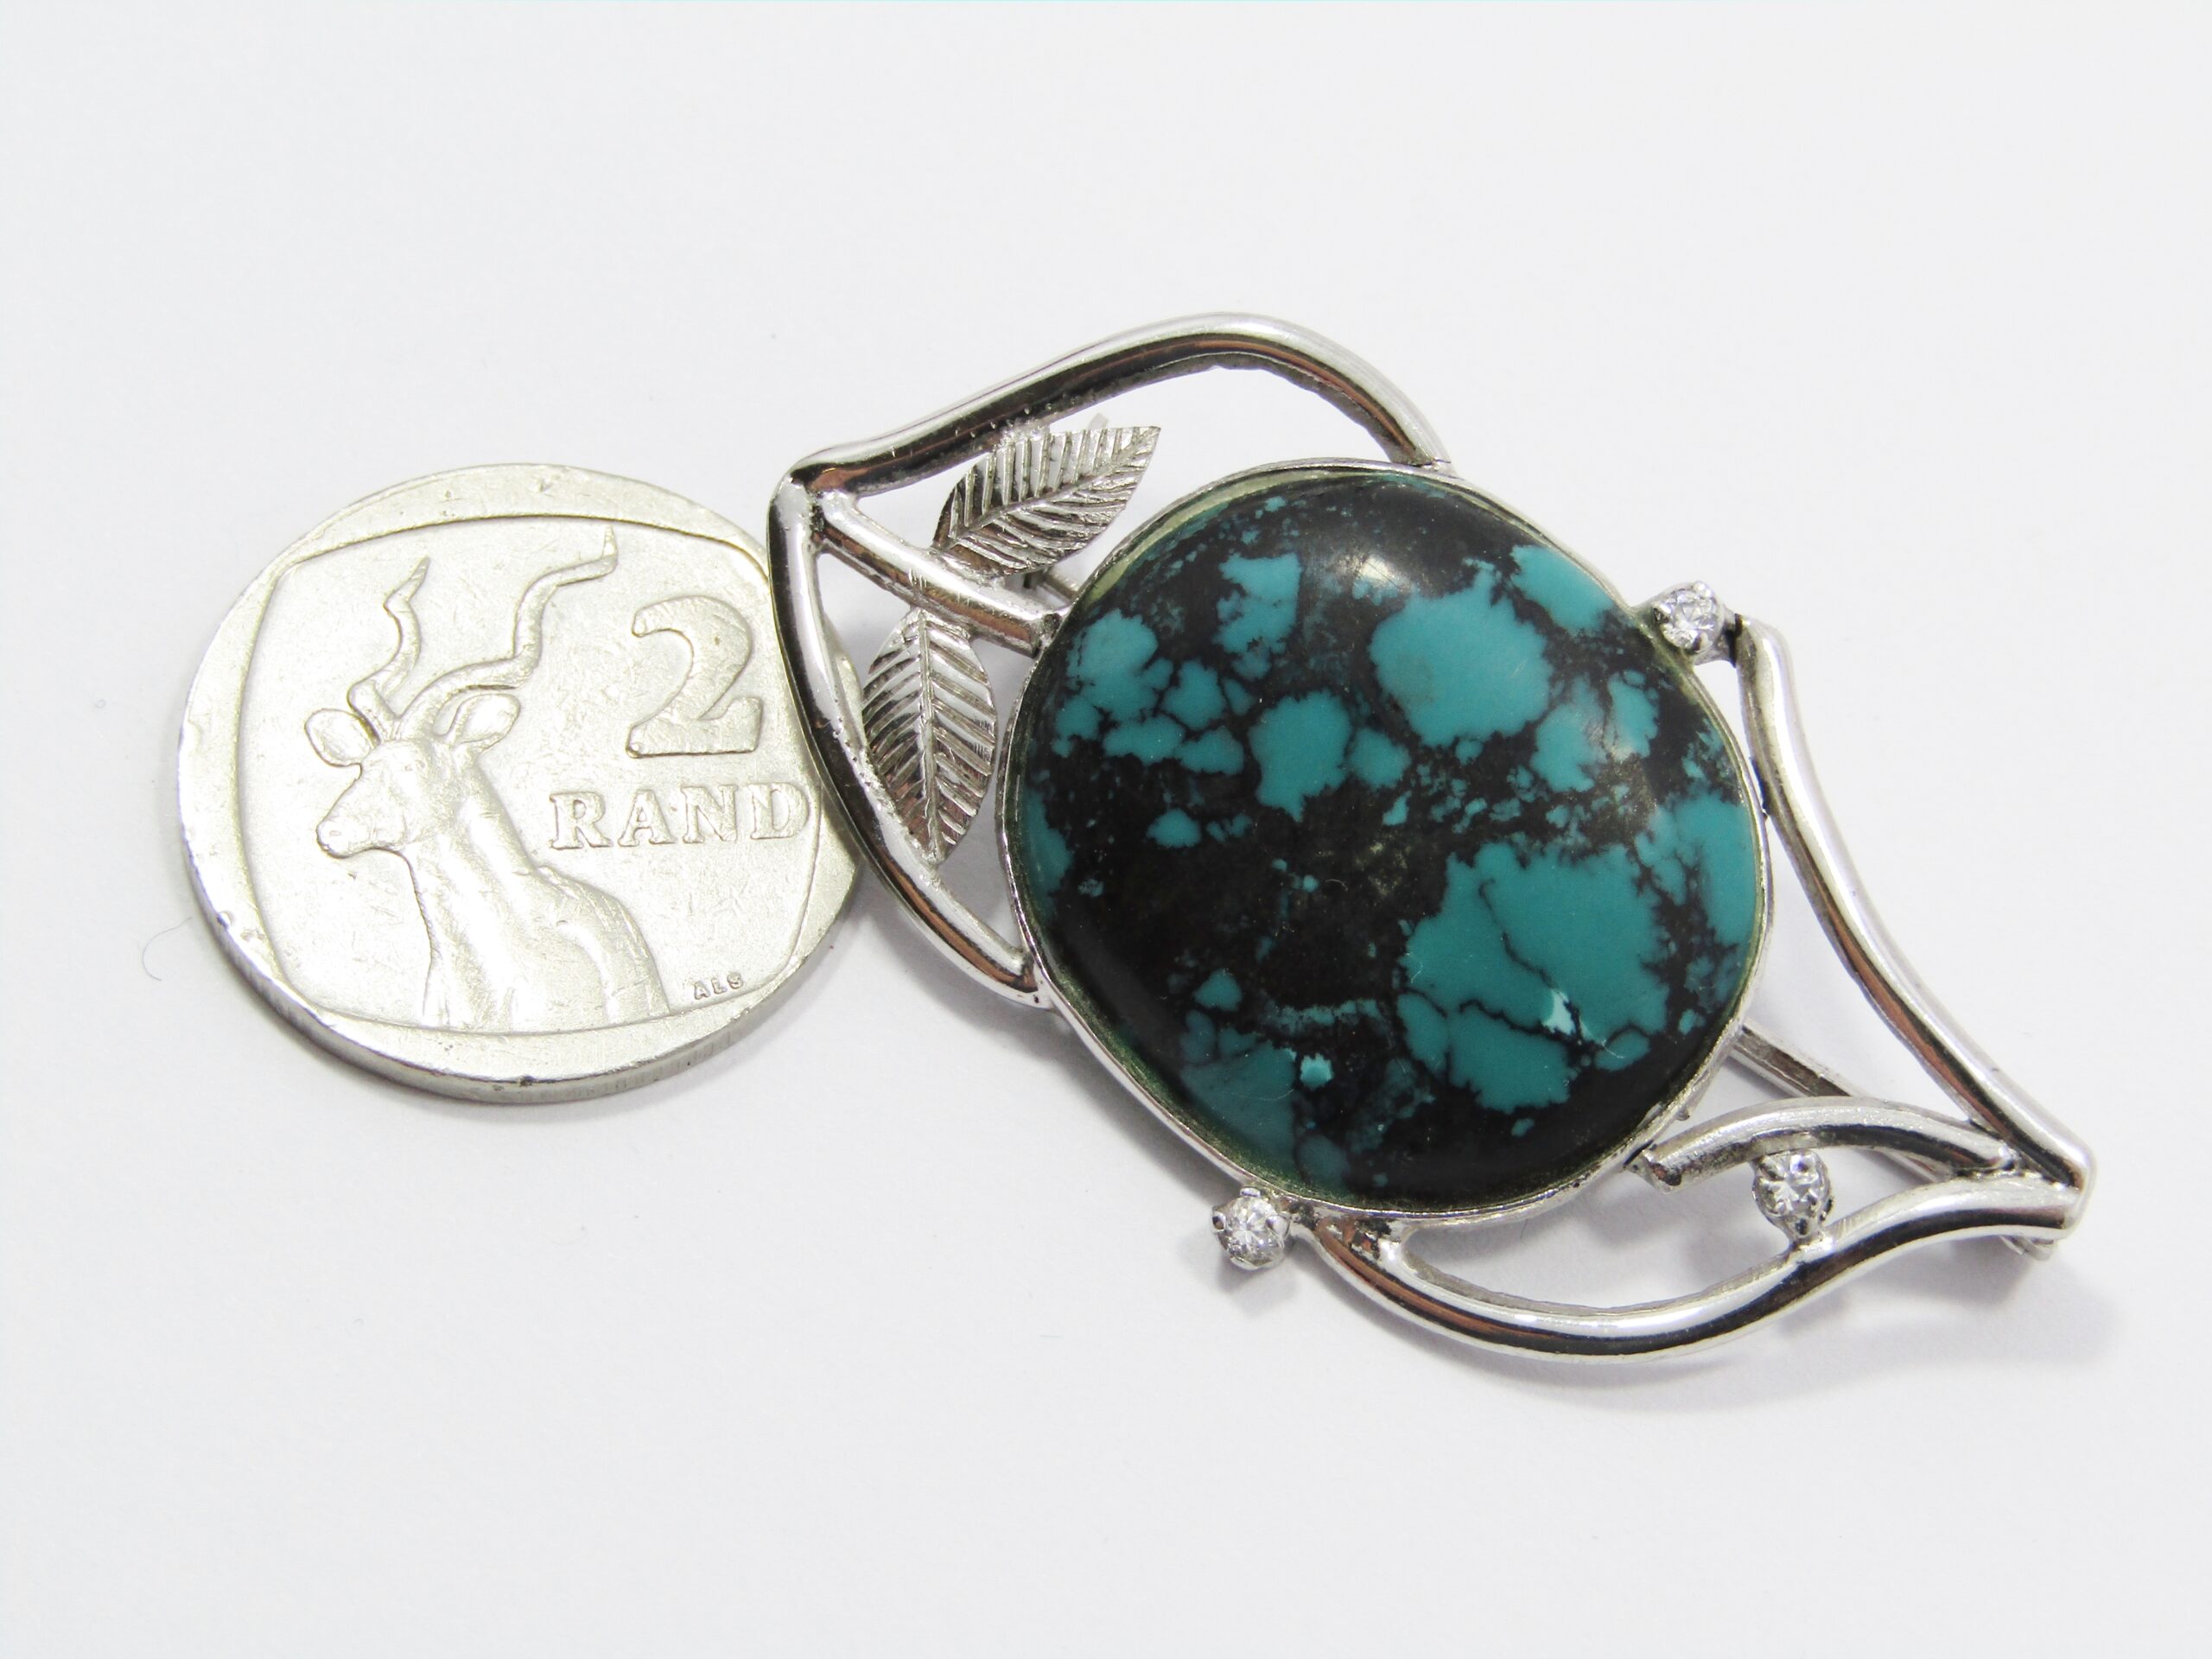 A Stunning Brooch With a Large Faux Turquois Stone in Sterling Silver.